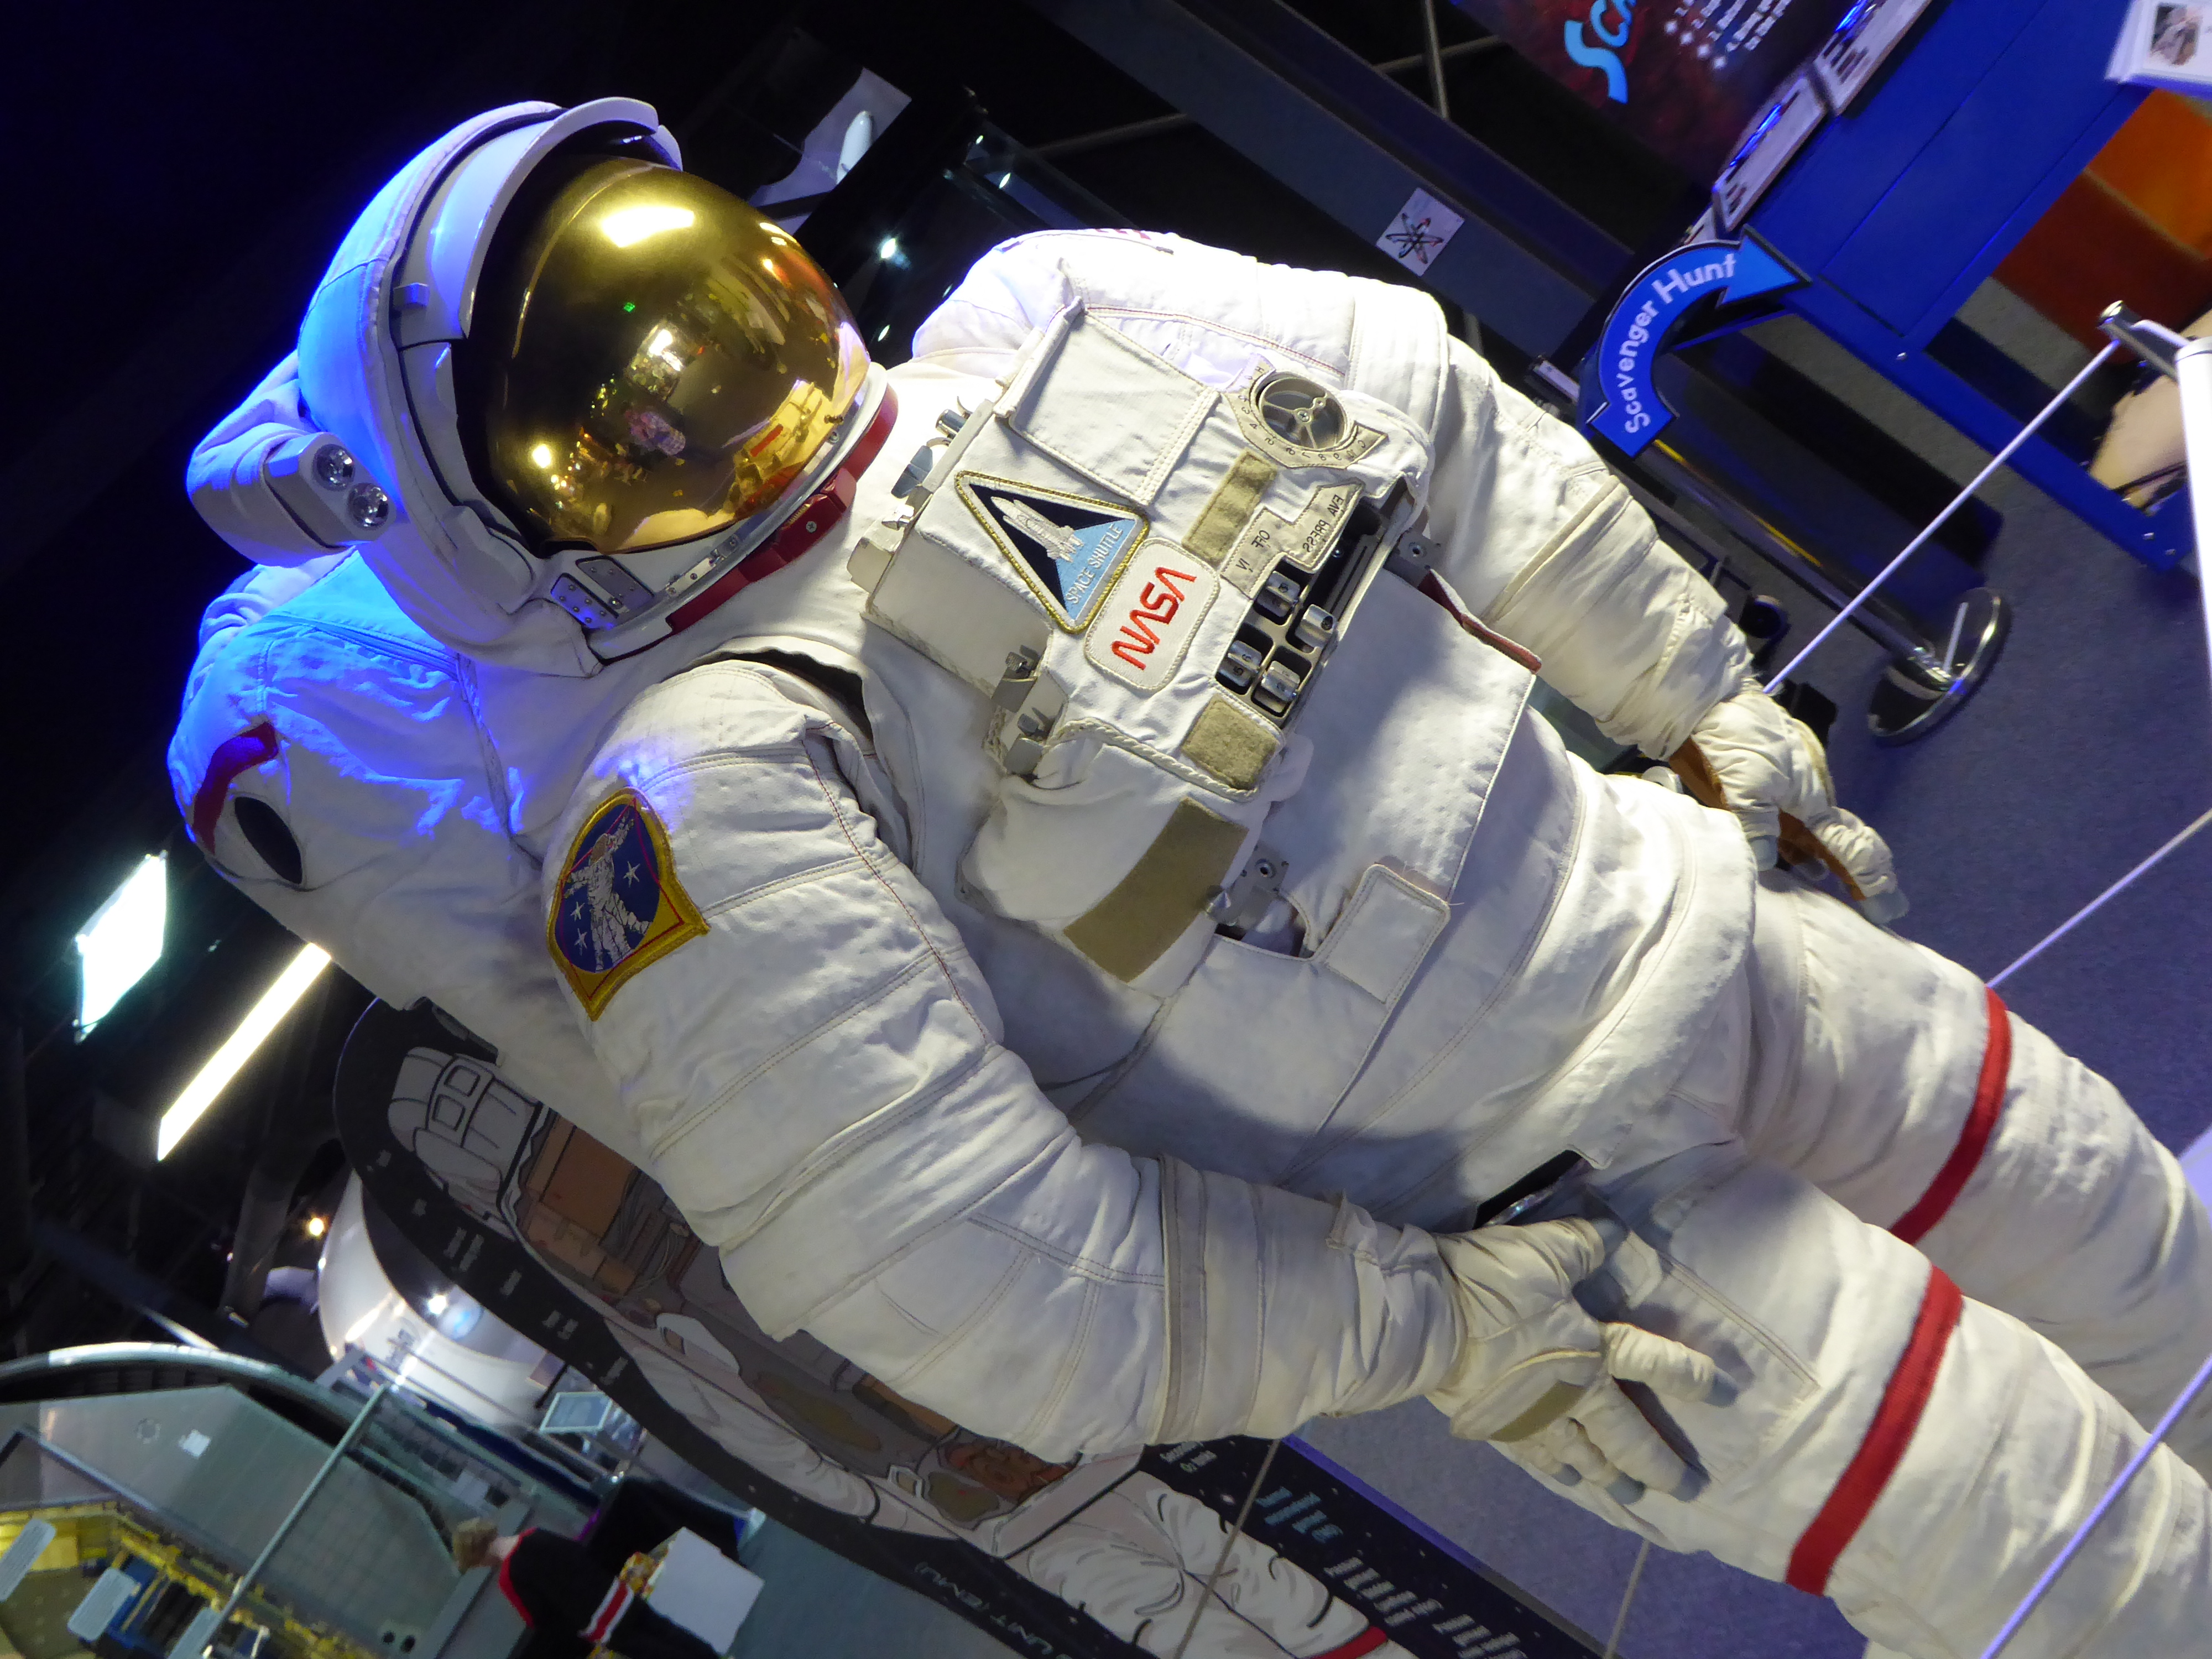 Explore the Universe at Space Foundation Discovery Center